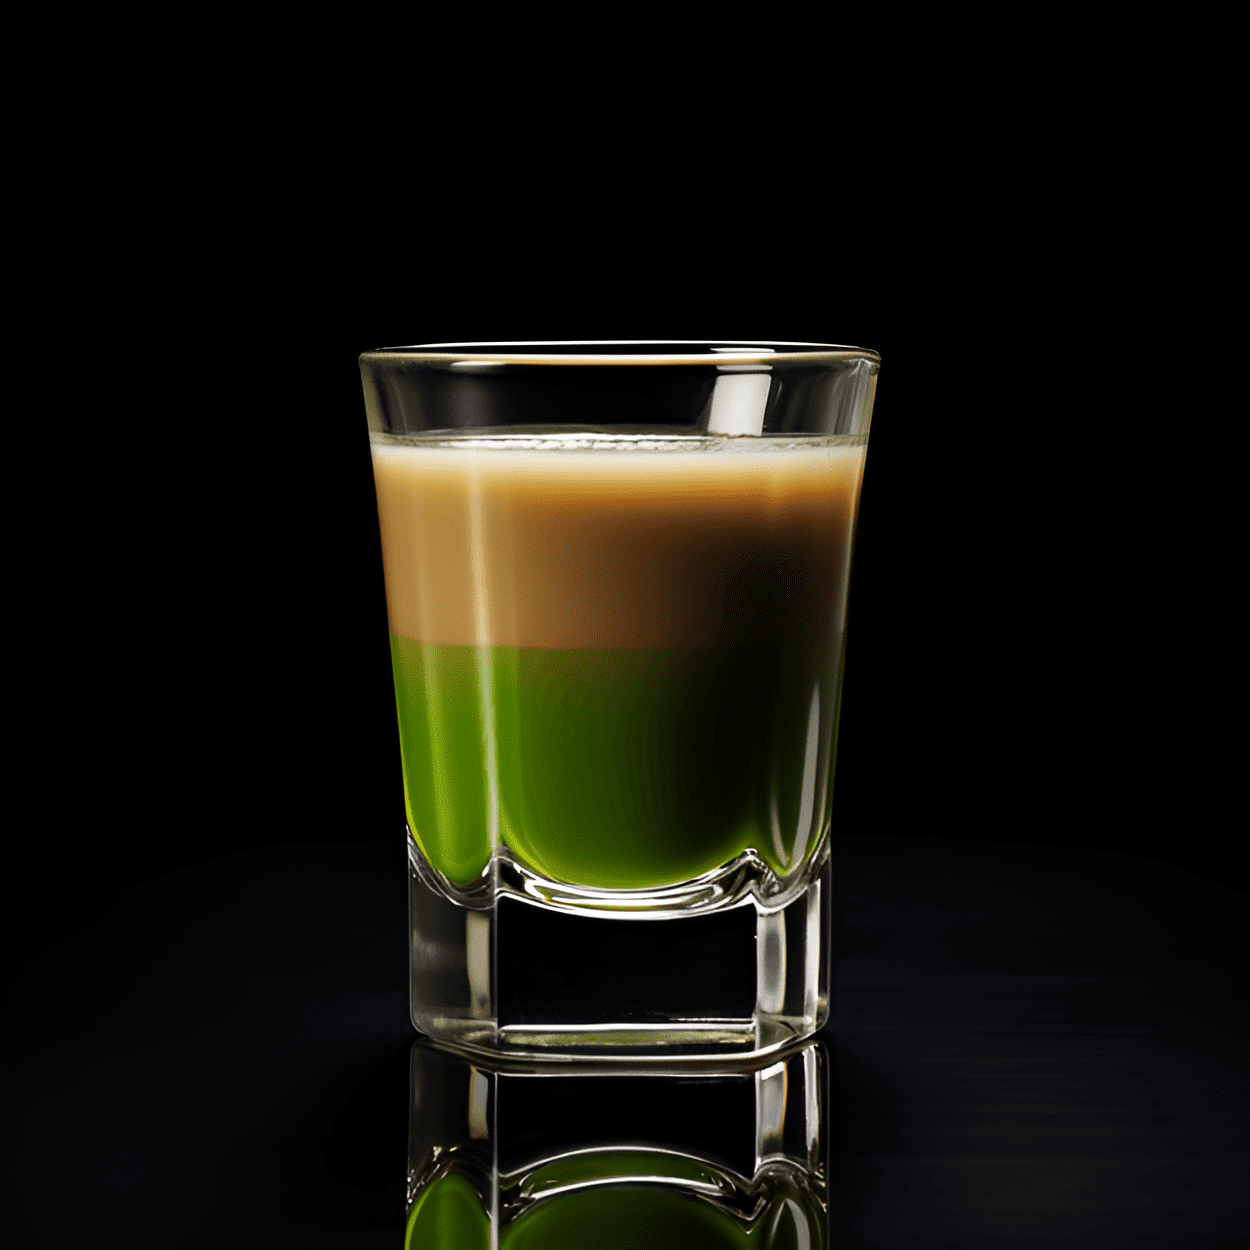 Springbok Cocktail Recipe - The Springbok cocktail is a delightful blend of sweet and creamy. The minty freshness of the crème de menthe is beautifully balanced with the rich, velvety creaminess of the Amarula cream. It's like a dessert in a glass, with a subtle kick of alcohol.